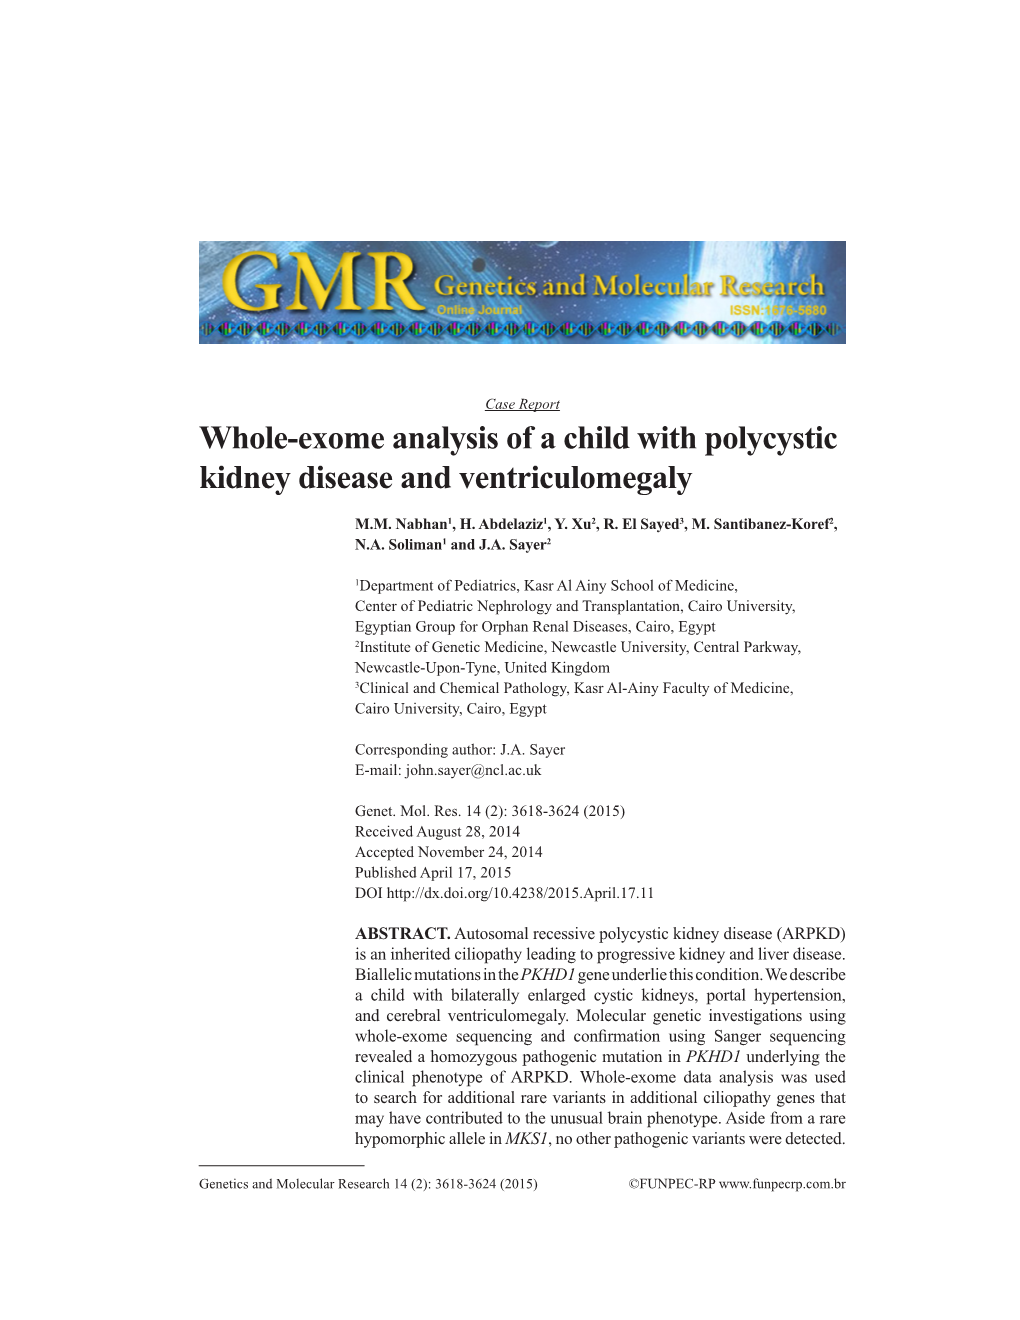 Whole-Exome Analysis of a Child with Polycystic Kidney Disease and Ventriculomegaly